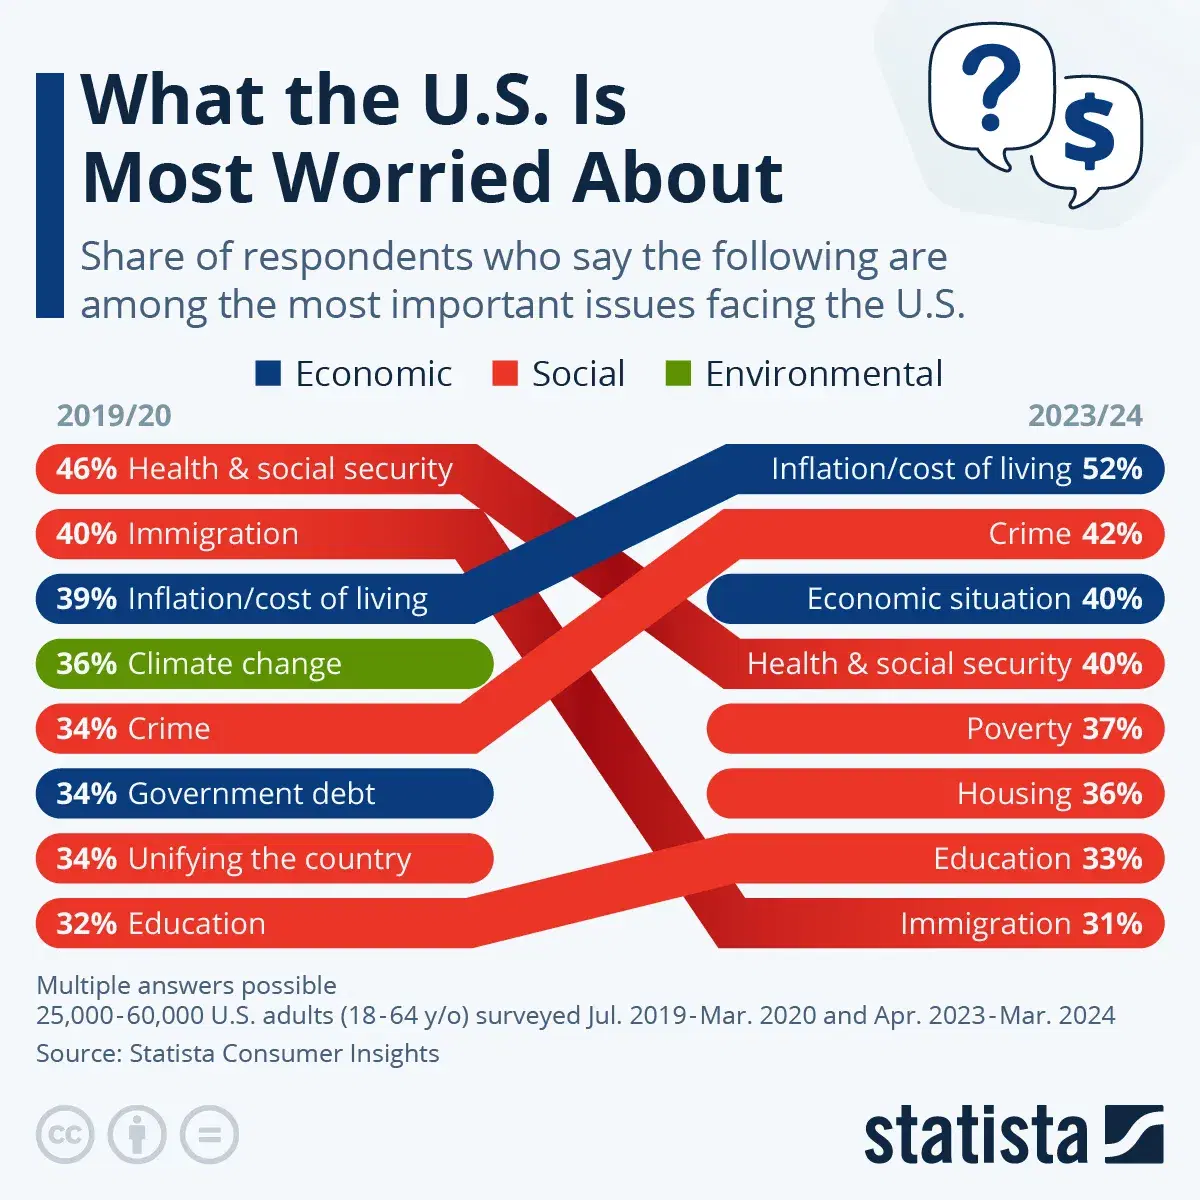 What the U.S. Is Most Worried About